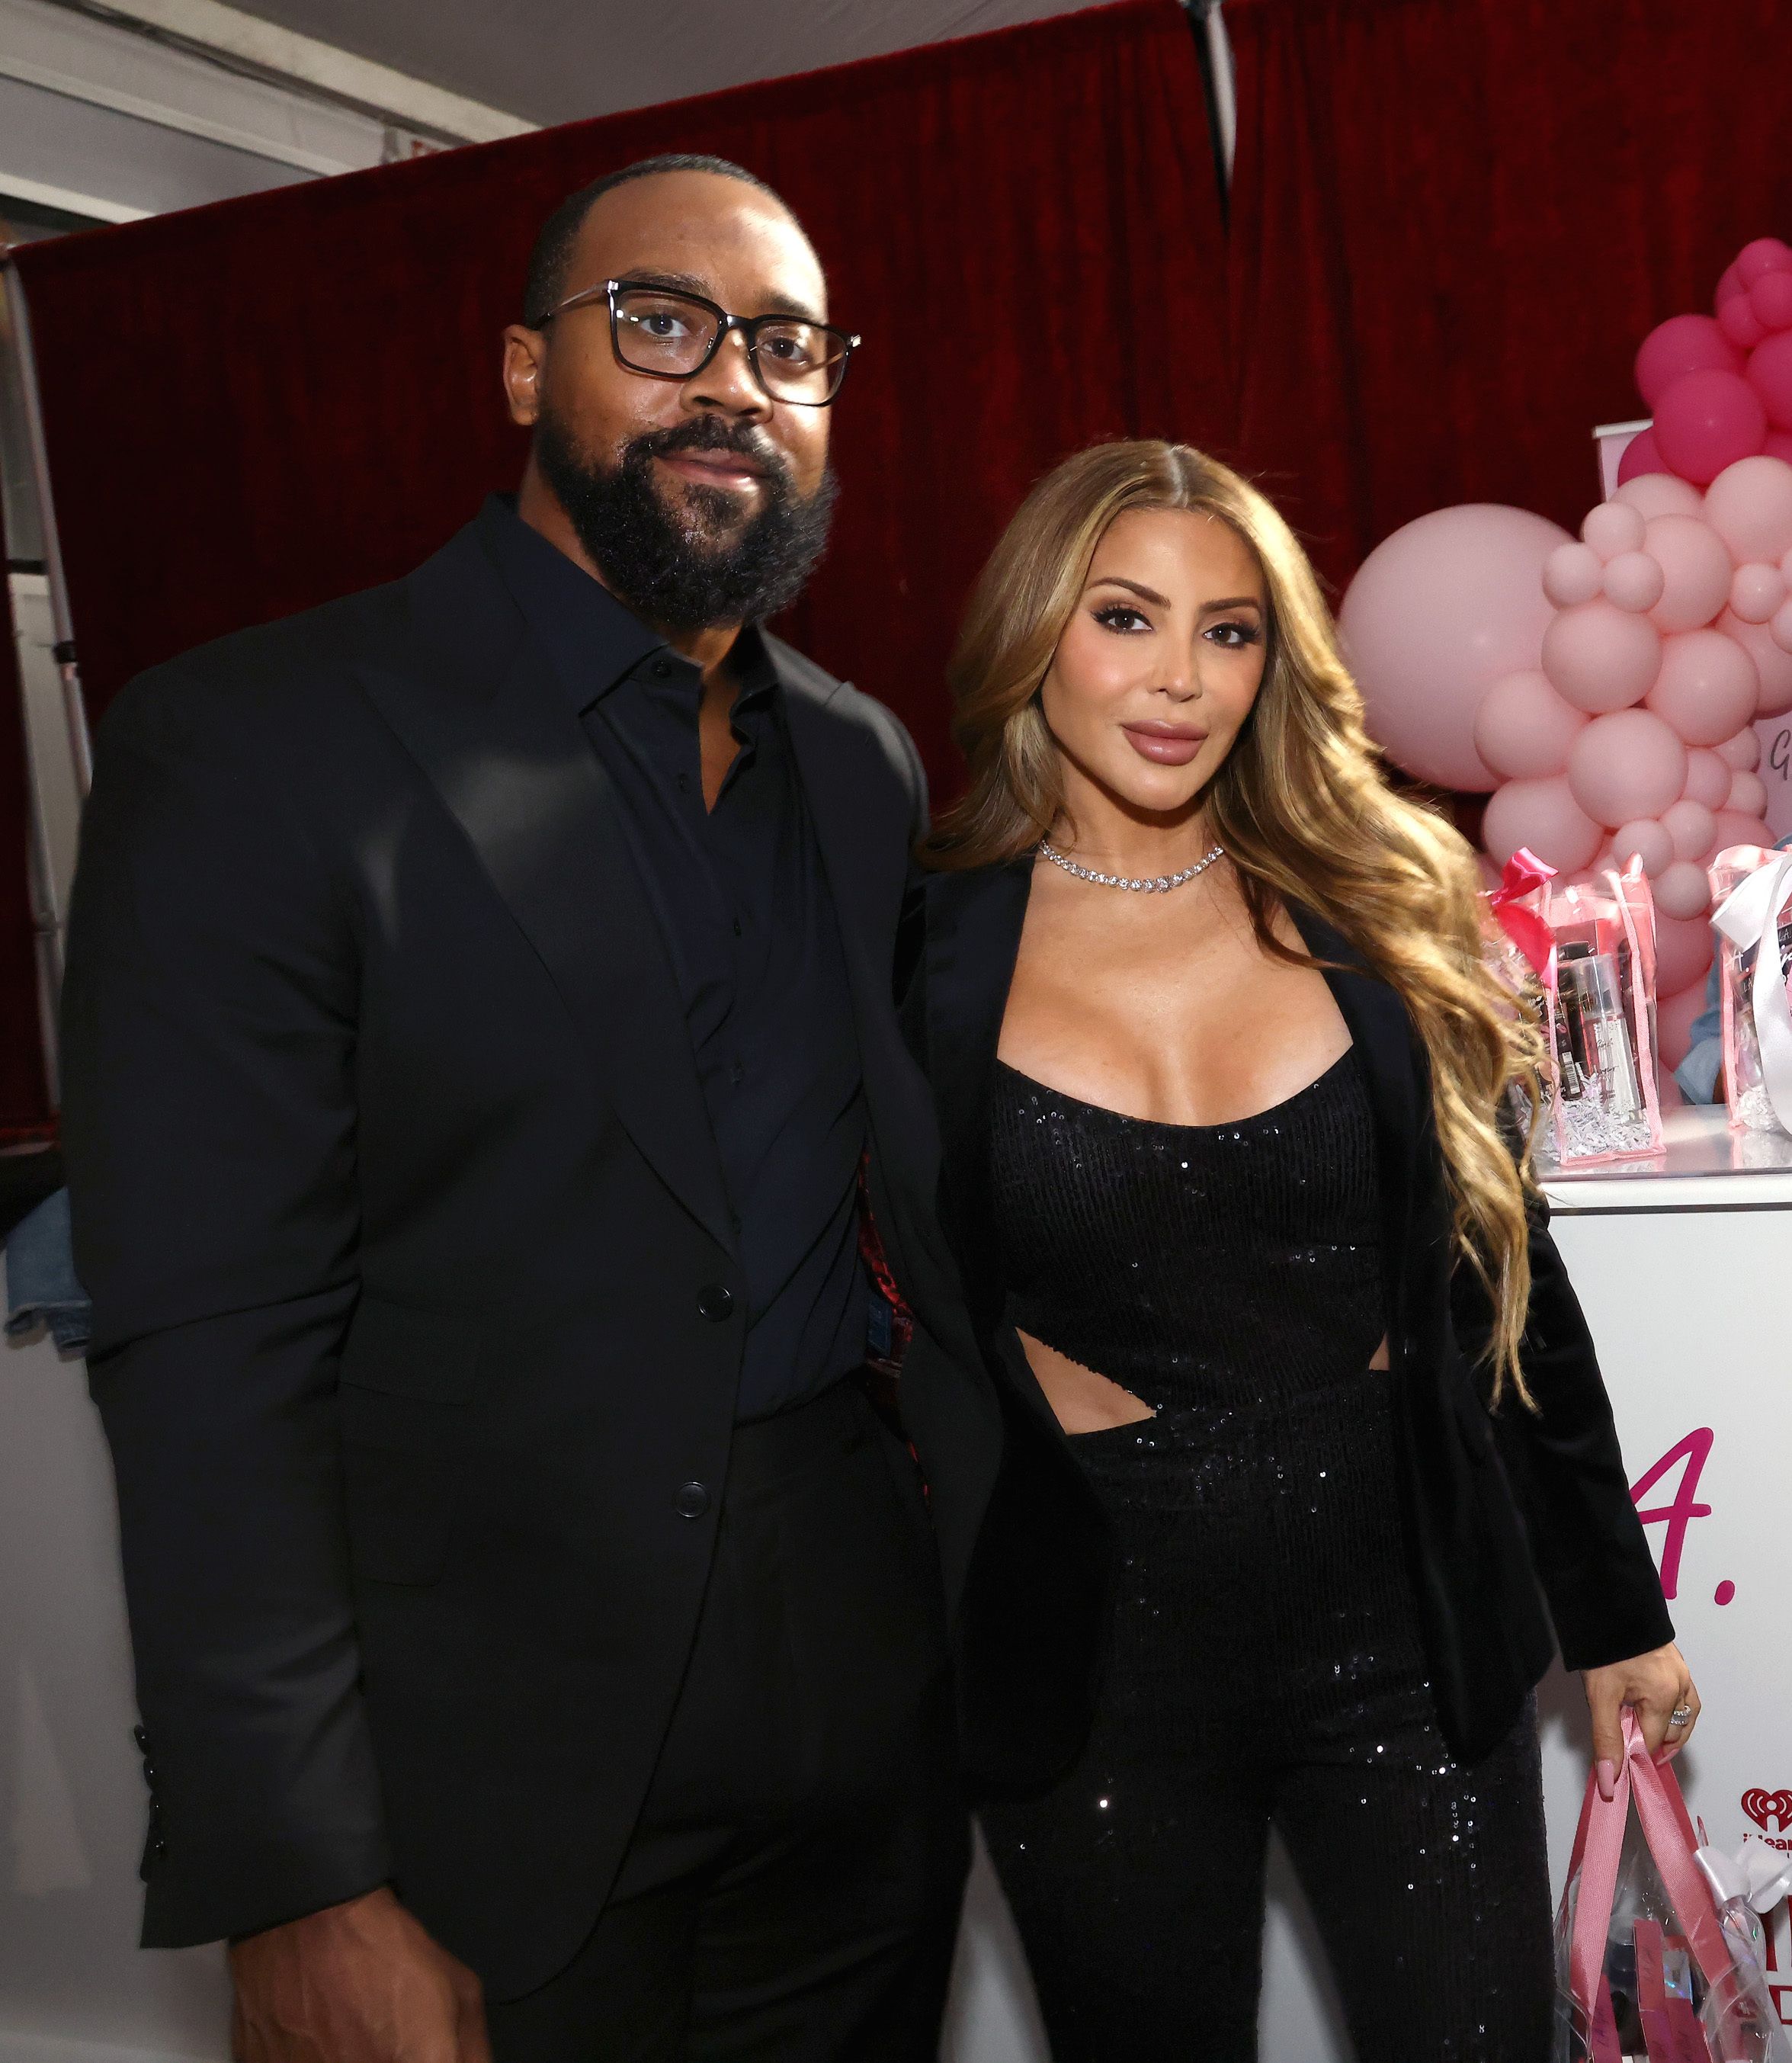 S12 Ep144: 03/21/24 - Marcus Jordan and Larsa Pippen Call It Quits...Again & CMA Star Has Secret Twins While Married!